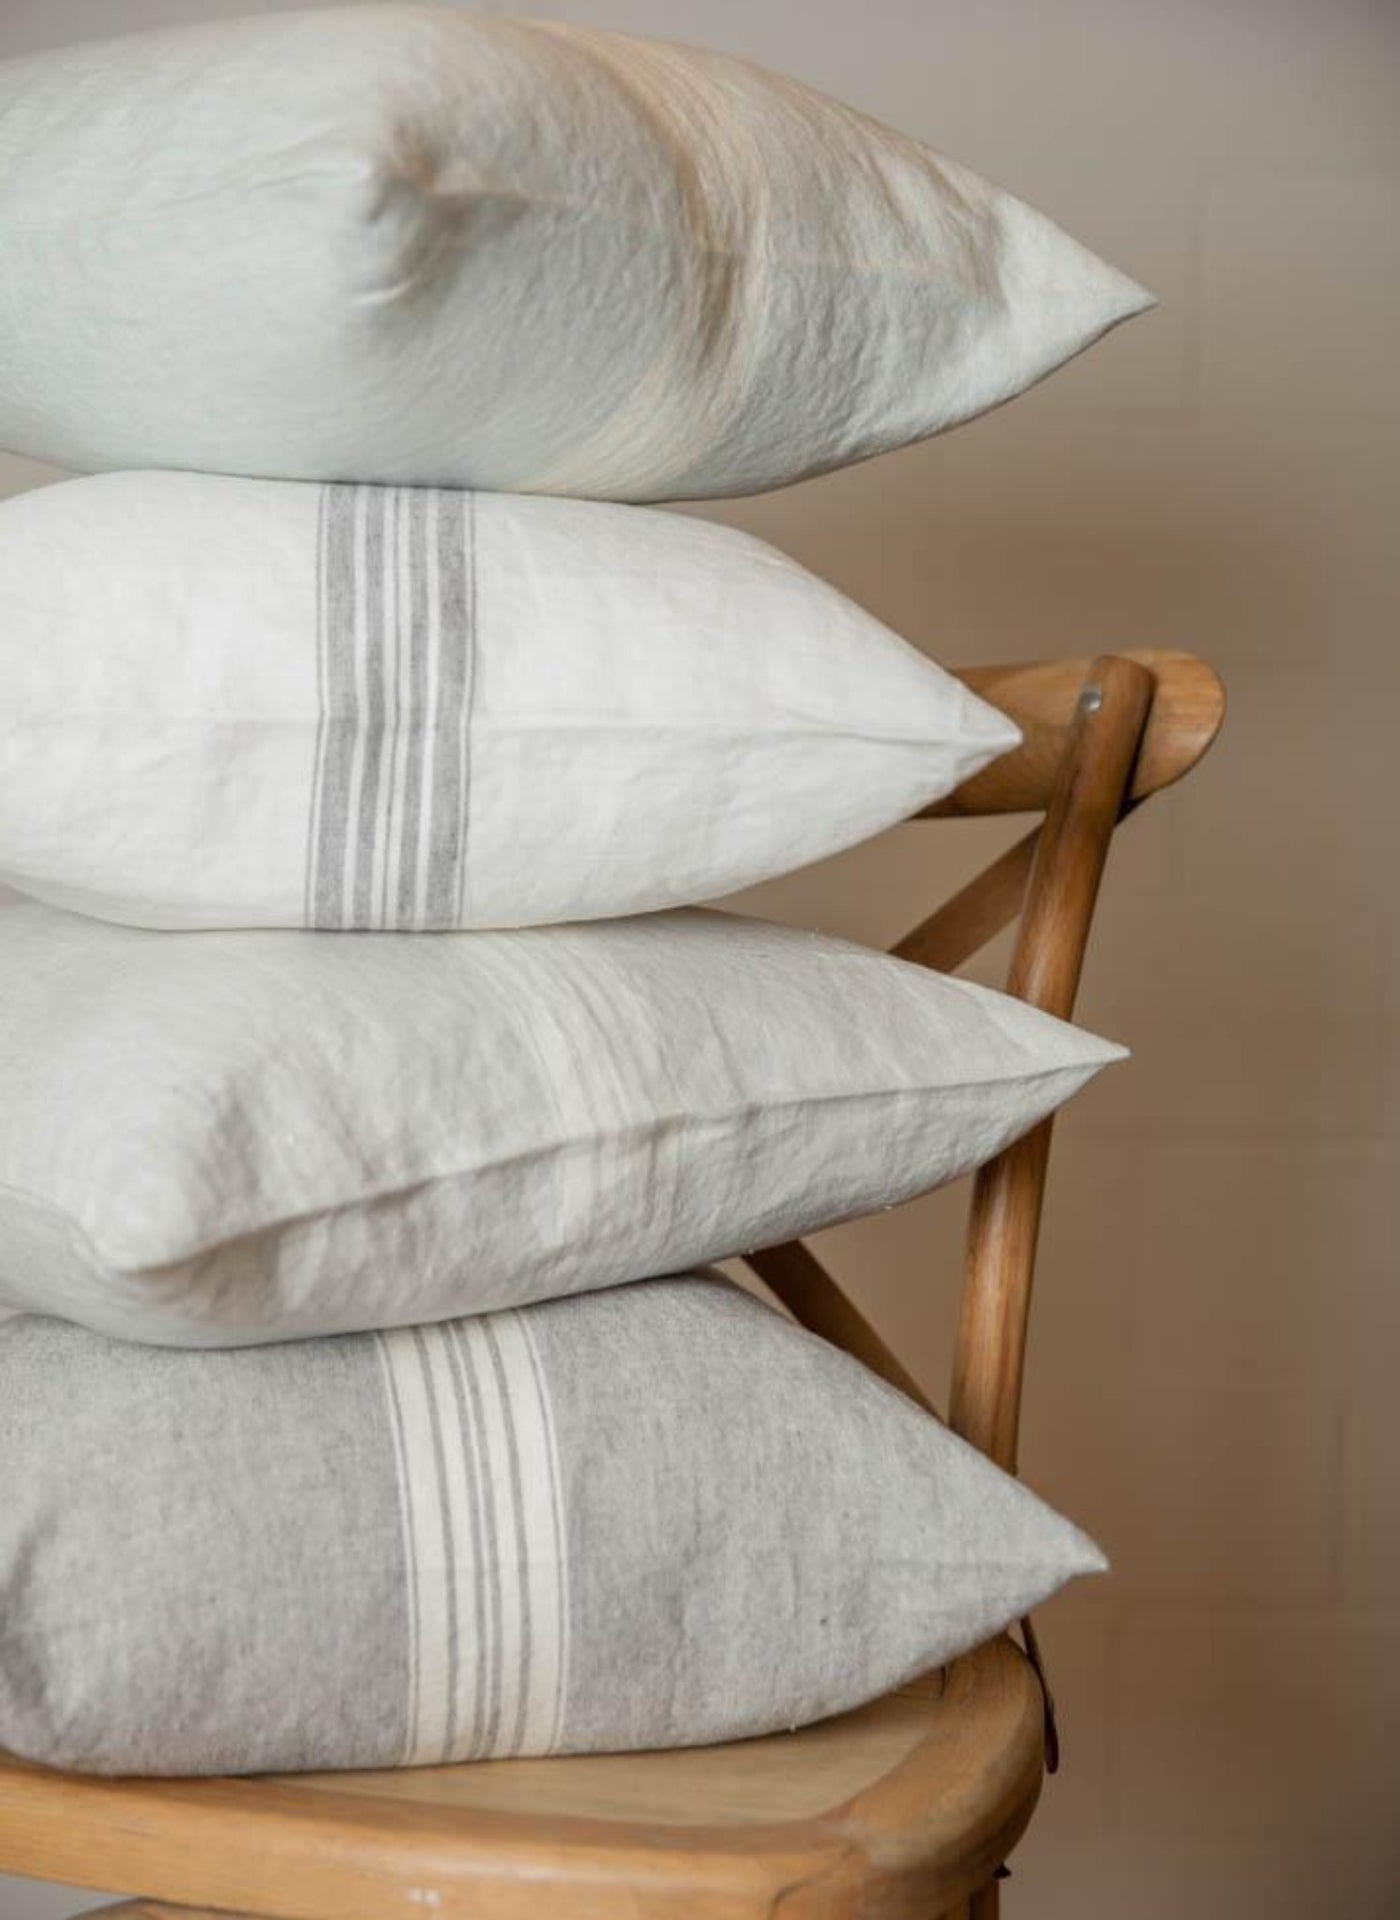 Maison Linen Pillows: By LinenWay. 18"x18" with down alternative insert.  Different colored pillows with stripes stacked on chair.